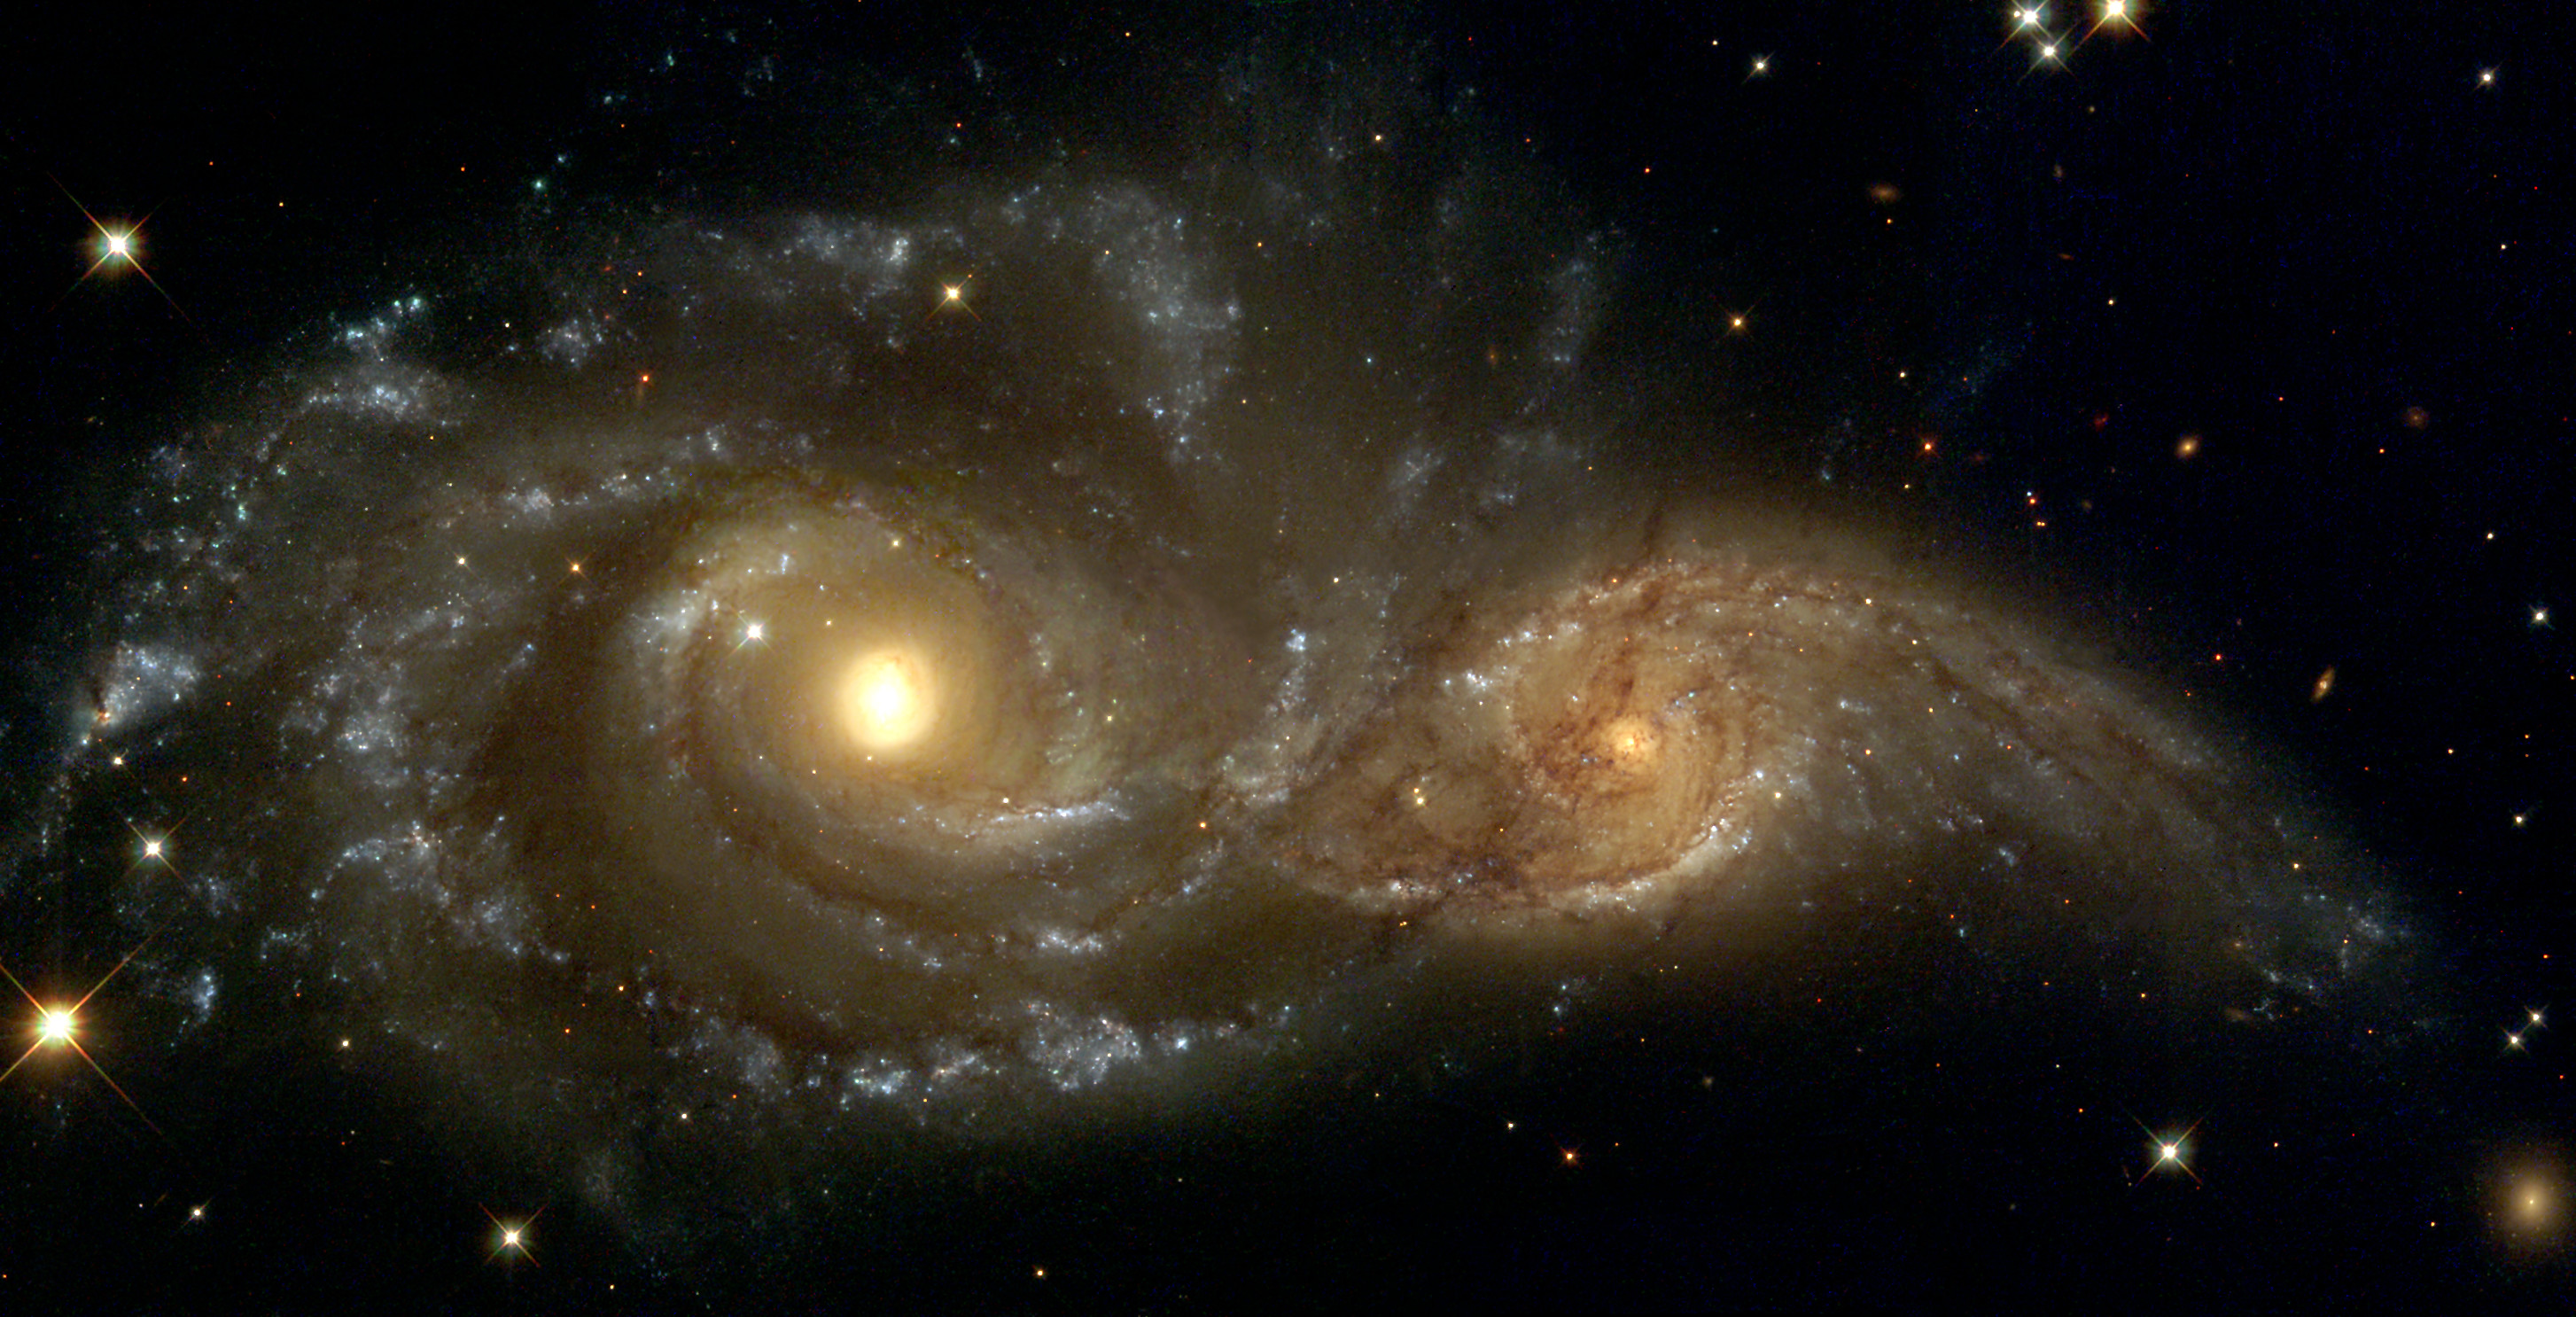 A Grazing Encounter Between Two Spiral Galaxies - Ngc 2207 And Ic 2163 , HD Wallpaper & Backgrounds